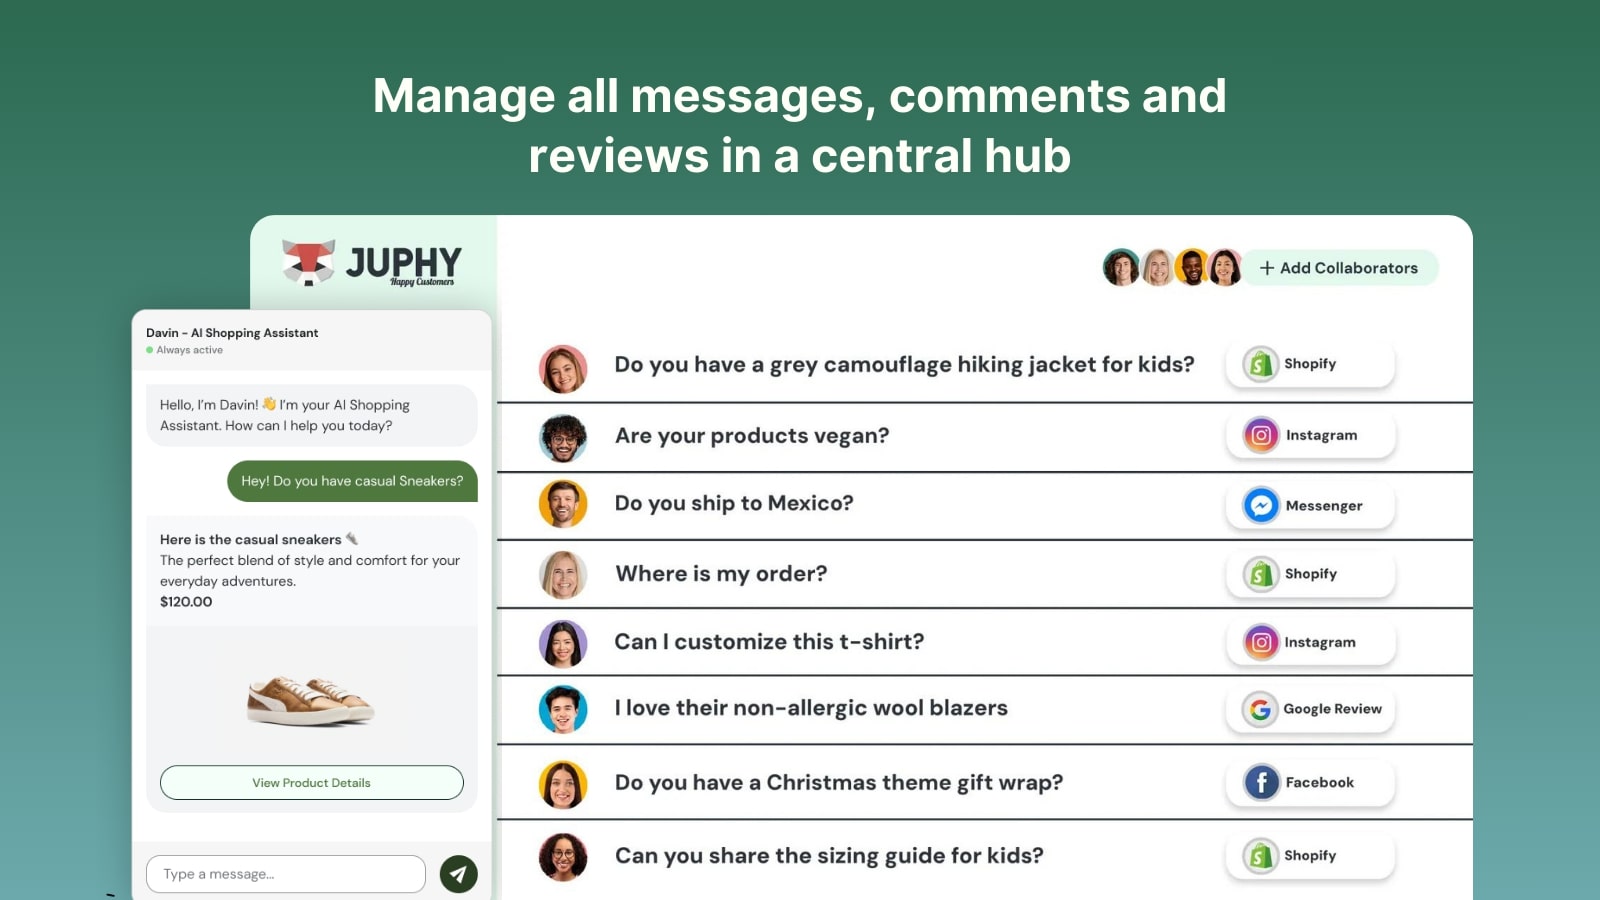 From responding to comments as direct messages to creating tags, categorizing messages, and collaborating with your team, you can easily streamline your communication and stay in control.